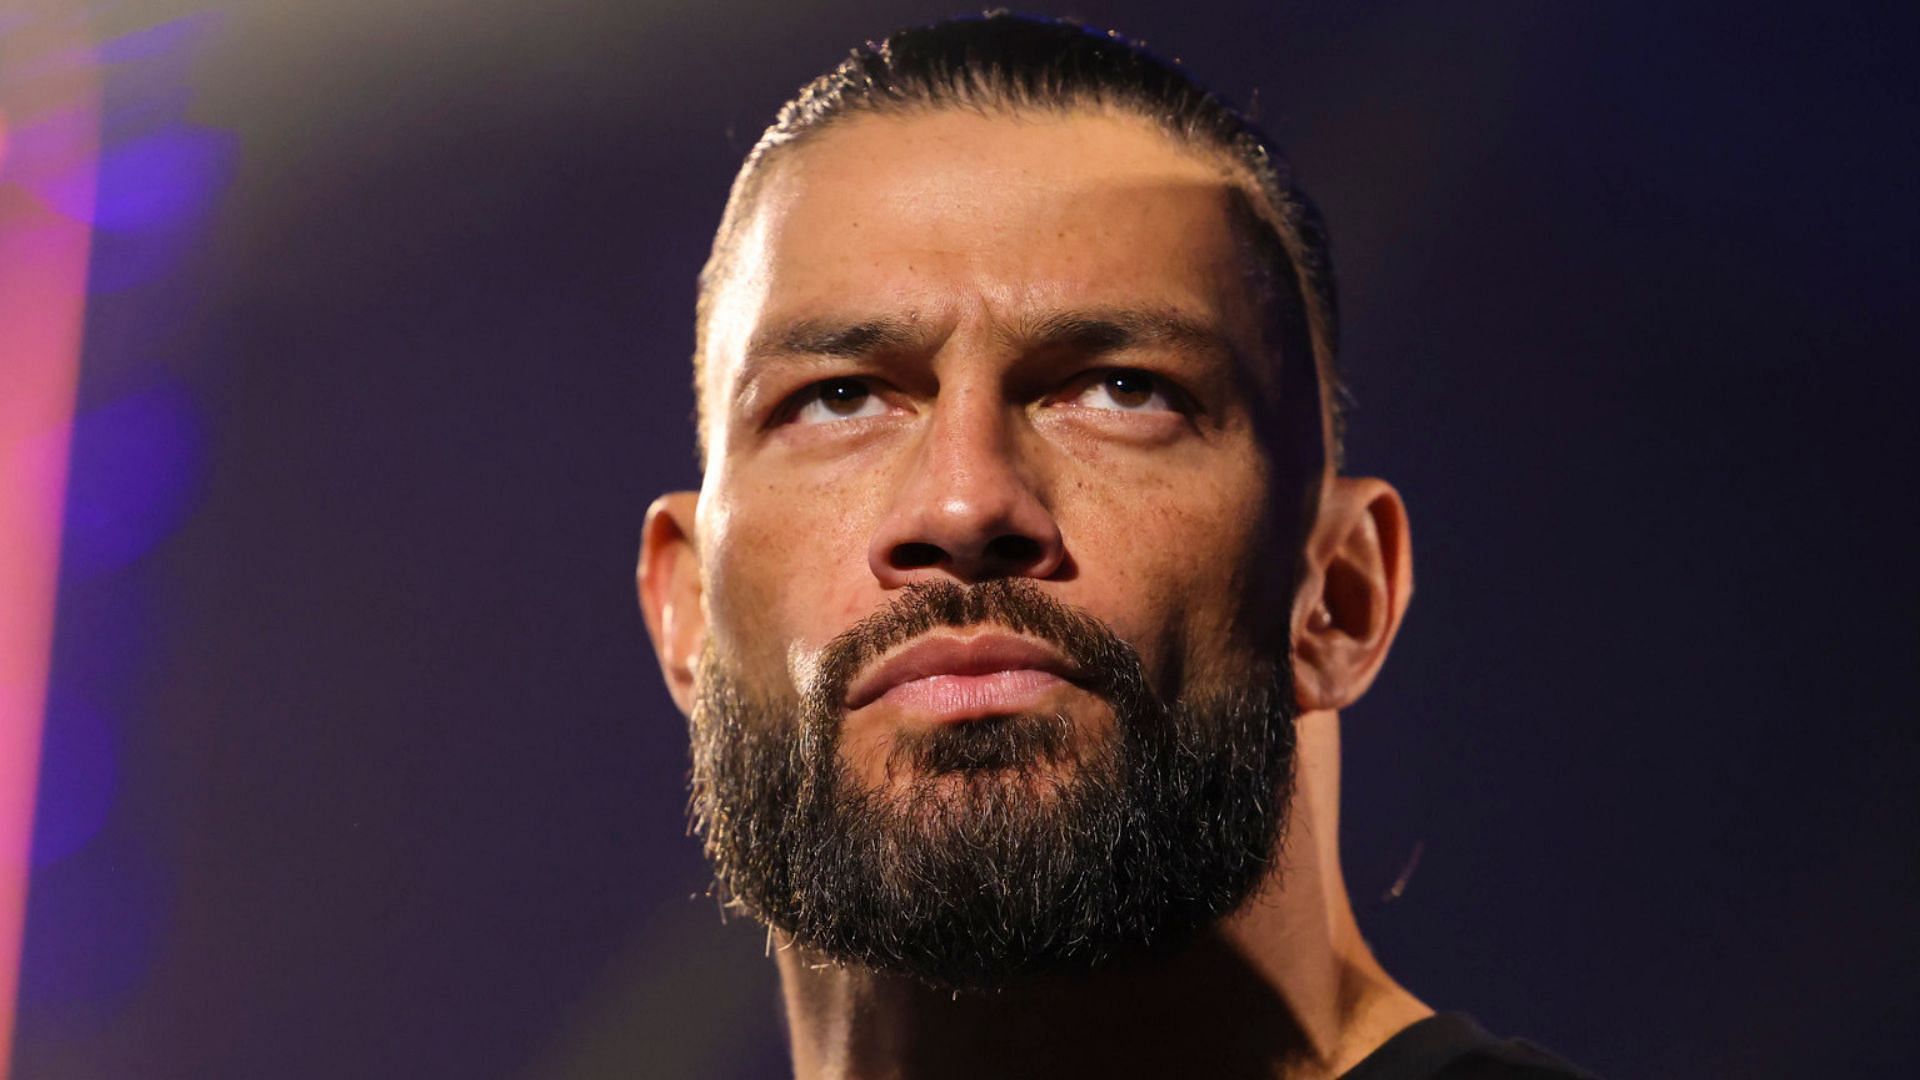 Reigns is the leader of The Bloodline faction.